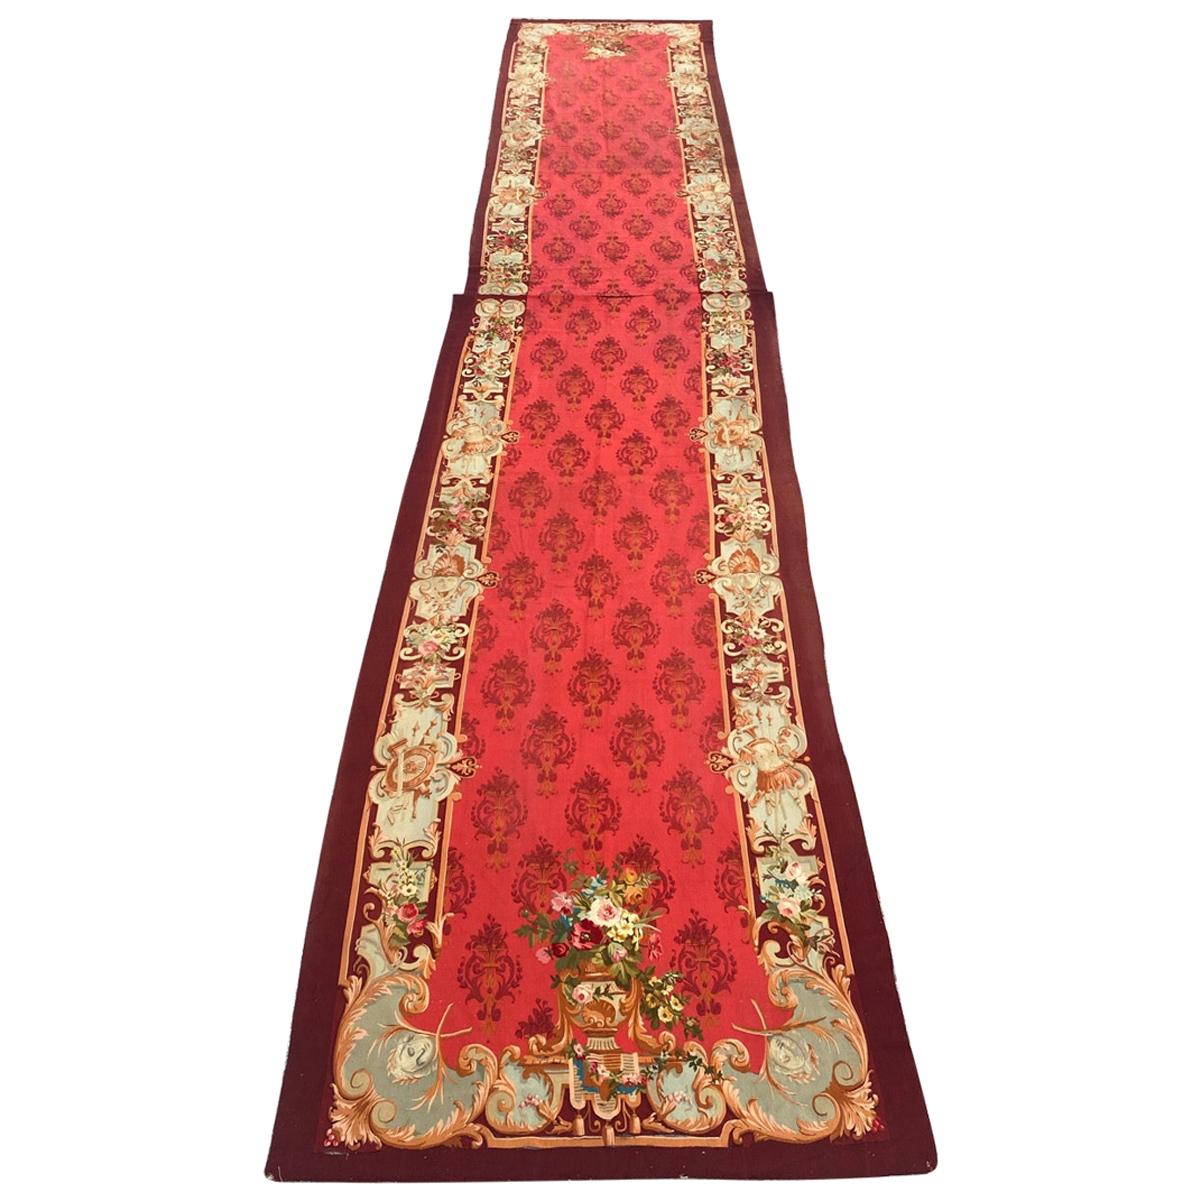 Wonderful Luxurious Antique Napoleon the Third Aubusson Tapestry Runner Rug For Sale